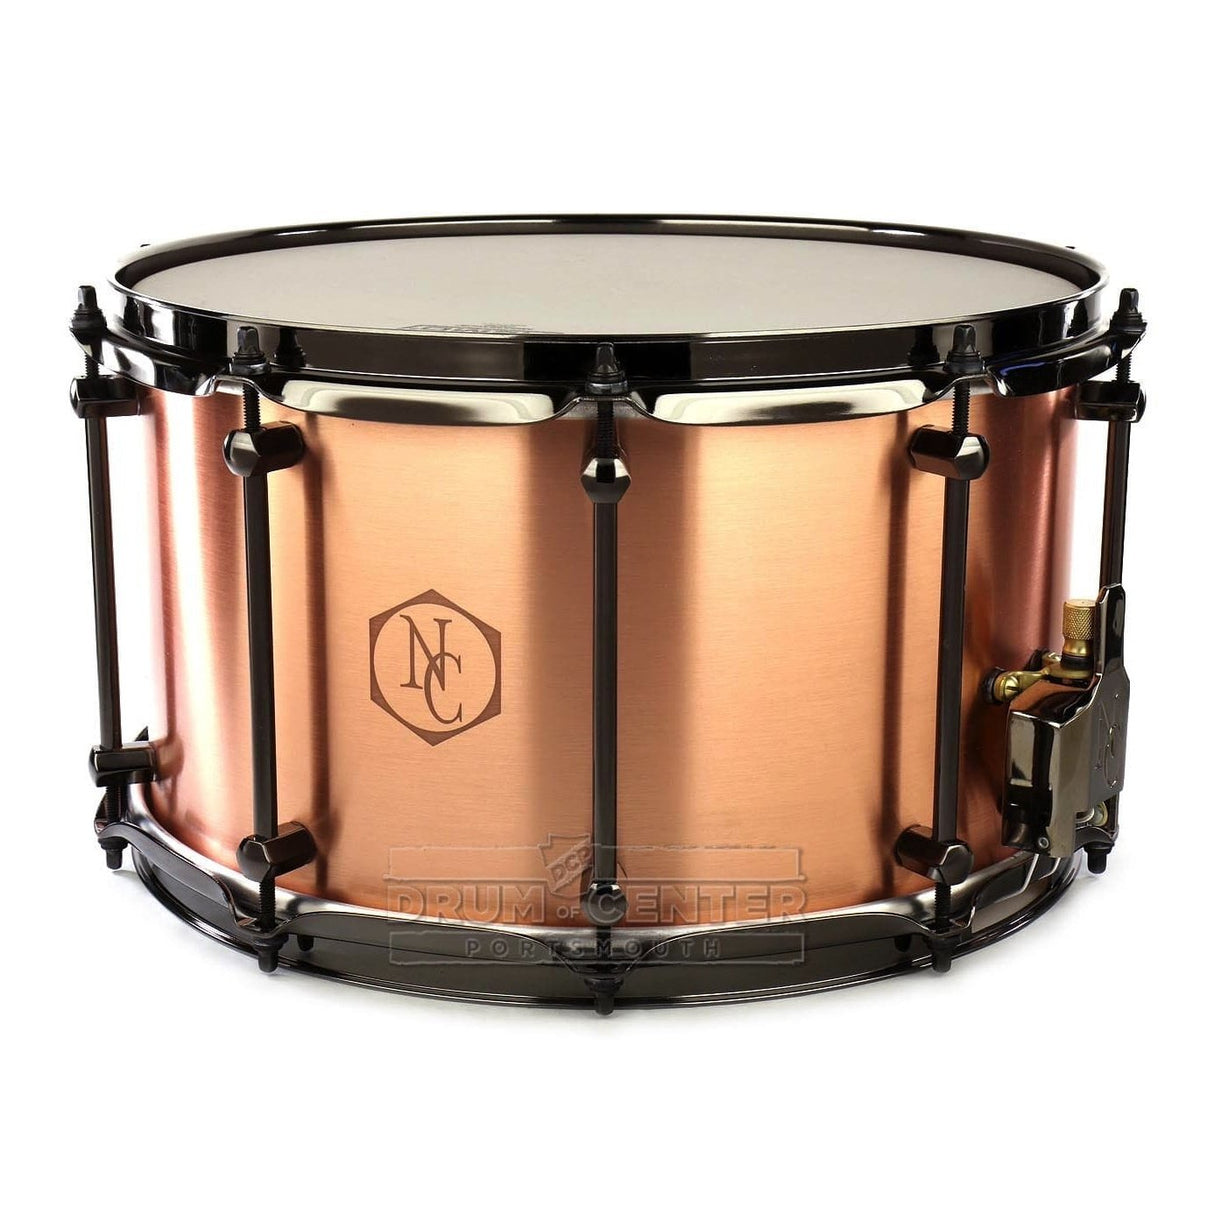 Noble & Cooley Copper Snare Drum 14x8 w/Black Hardware